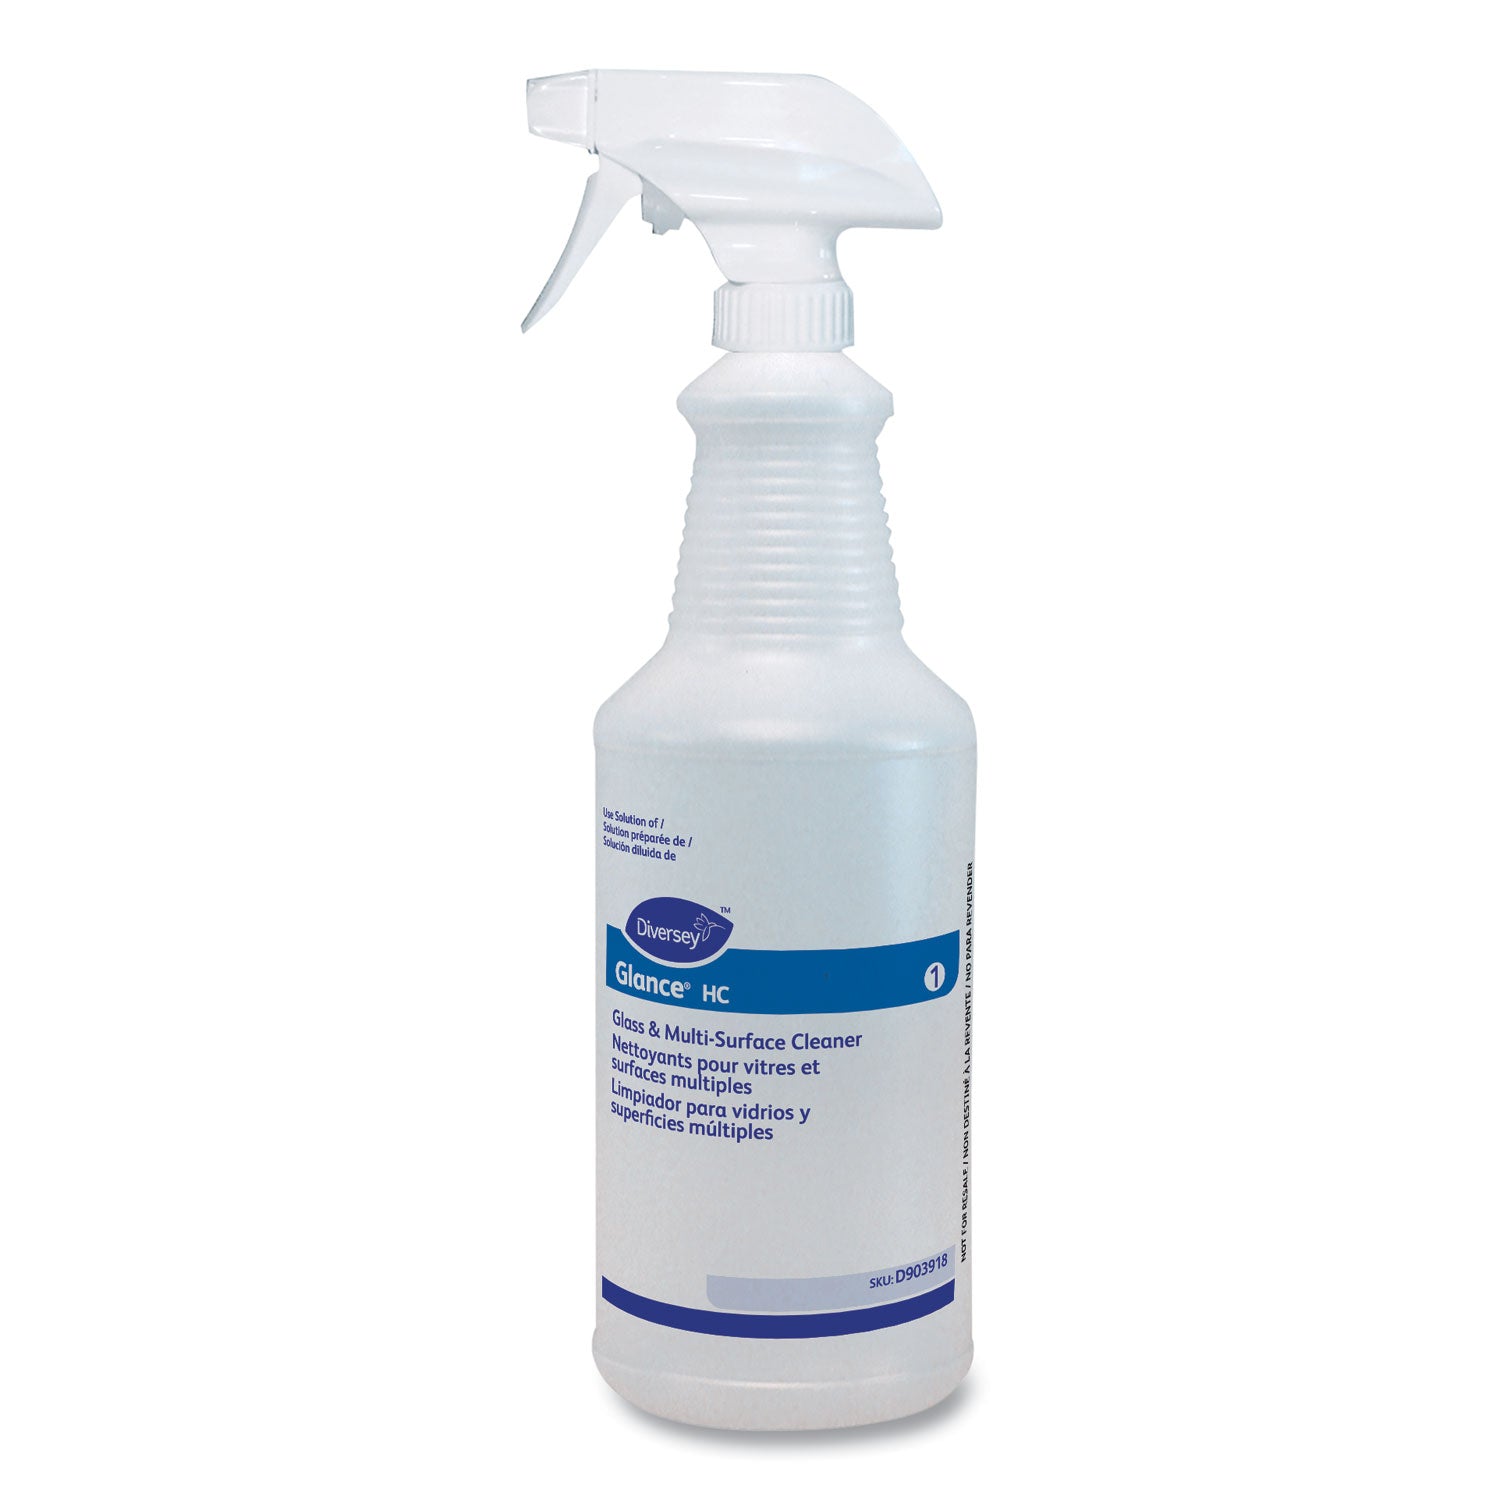 glance-hc-glass-and-multi-surface-cleaner-empty-bottle-32-oz-clear_dvod903918 - 1